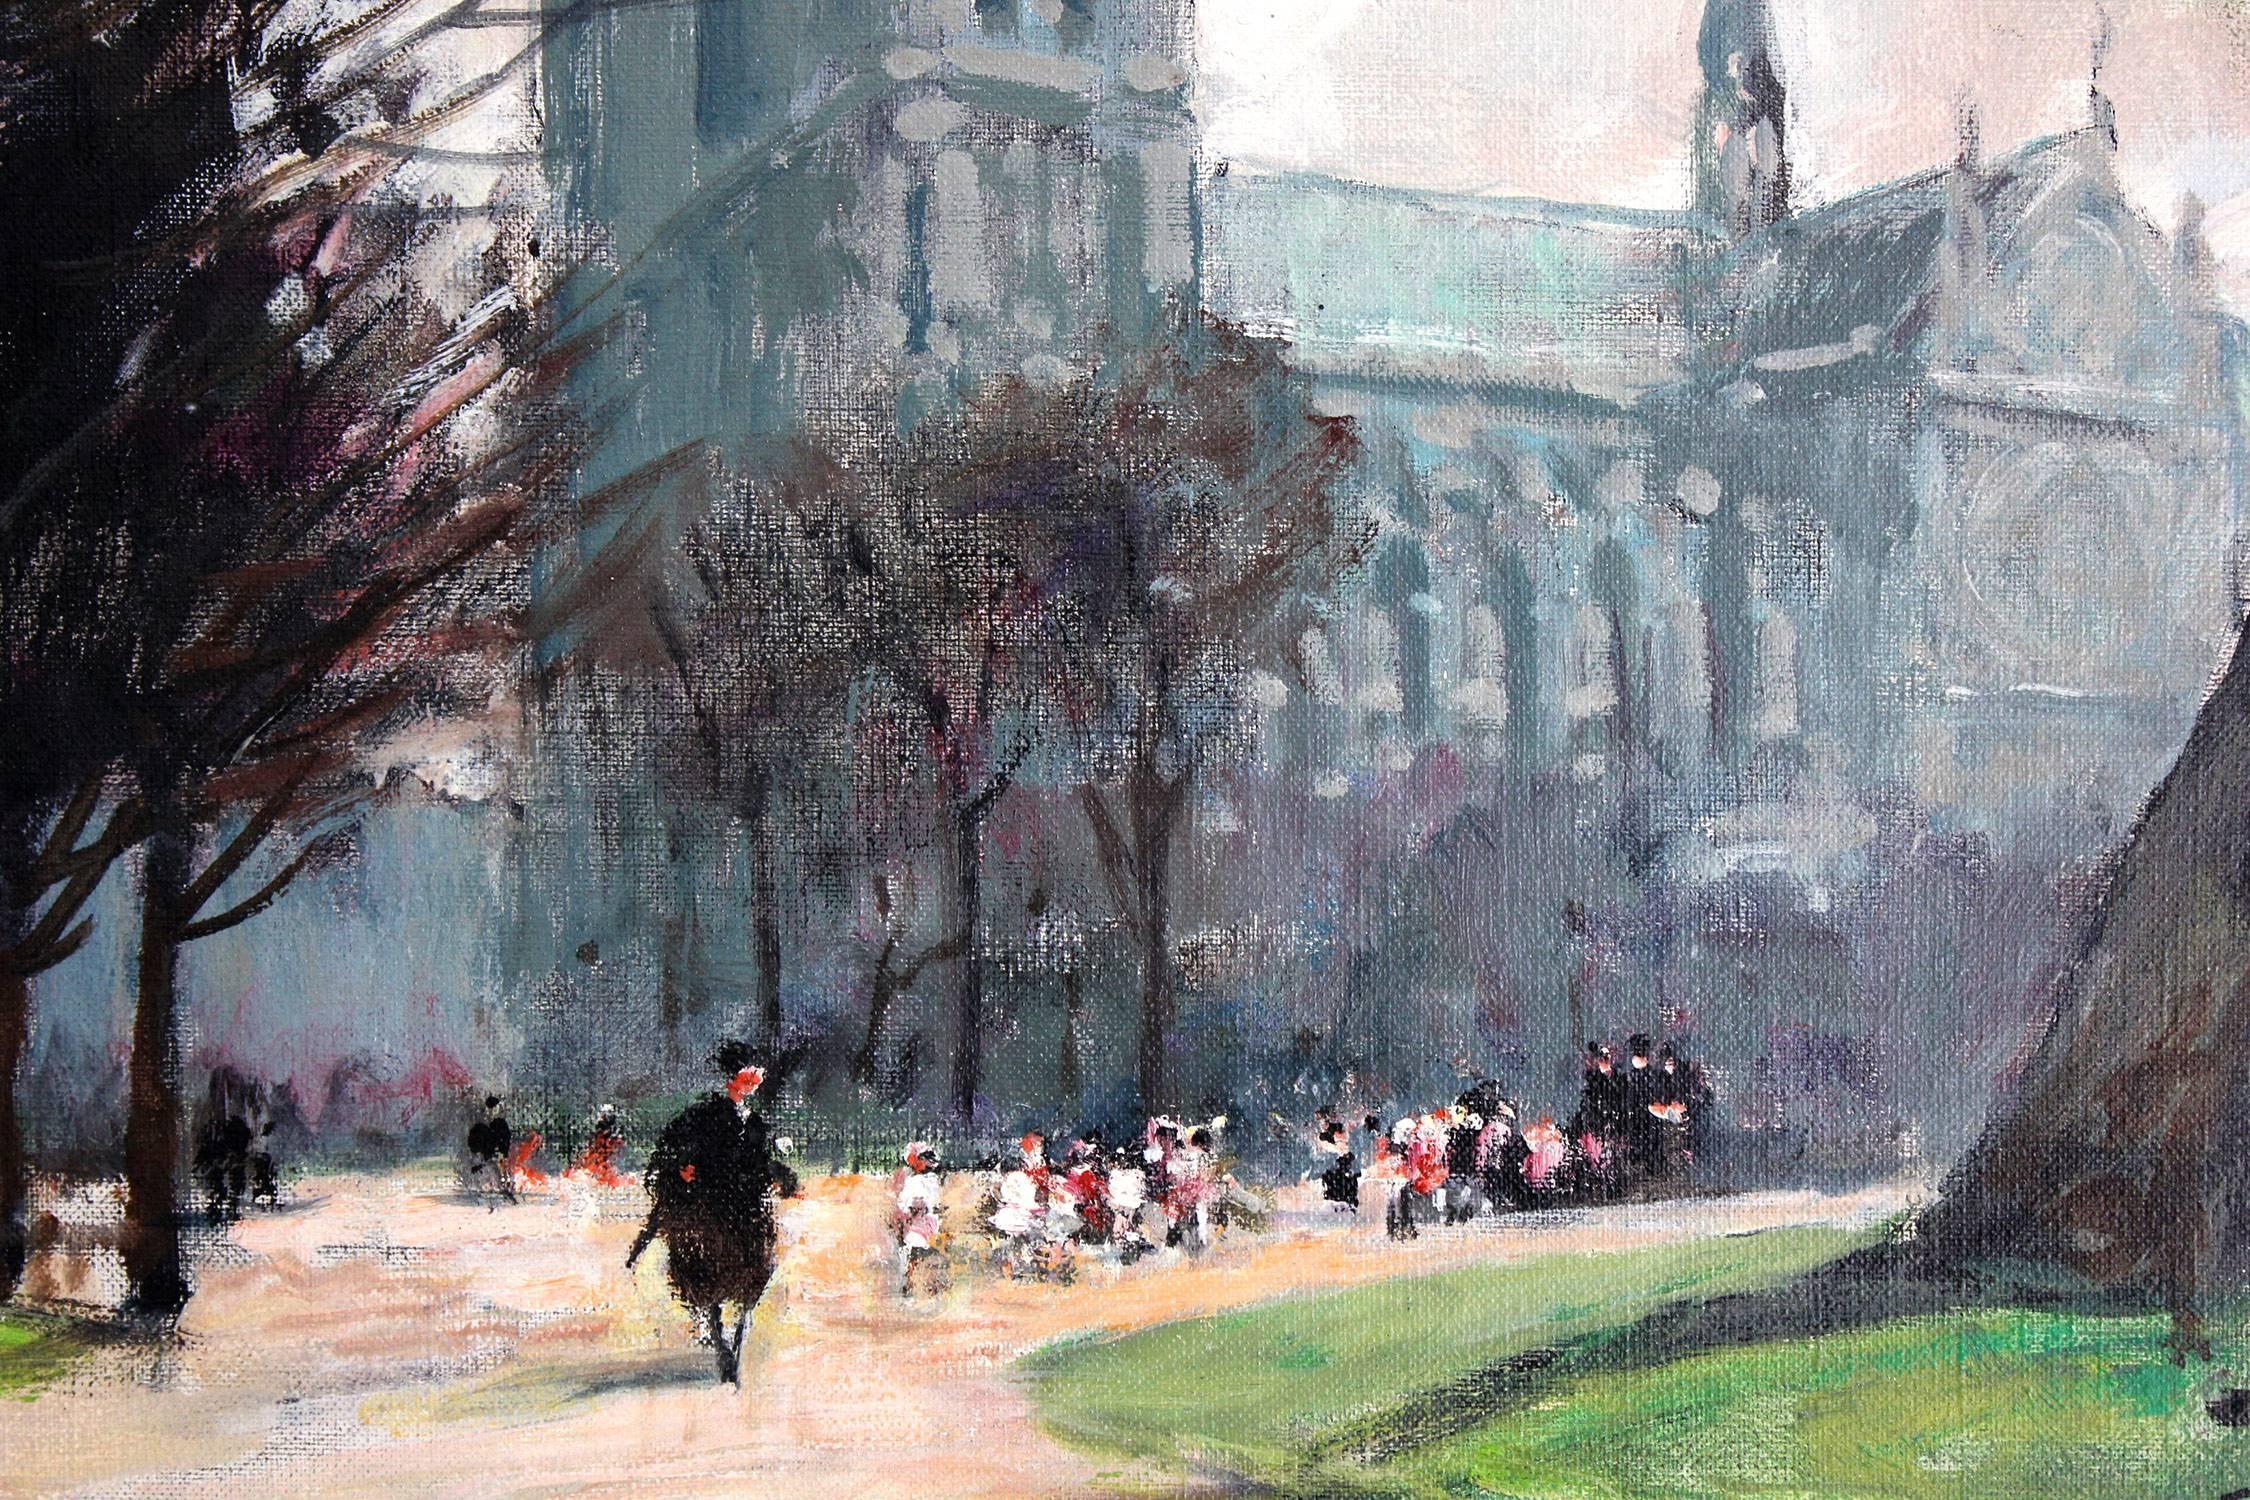 An exceptional impressionistic depiction of the Path by Notre Dame in Paris by Jules René Hervé on a fall day with the busy activities of school children walking and of figures seated on a bench. Hervé is known as a painter of the scenes of the